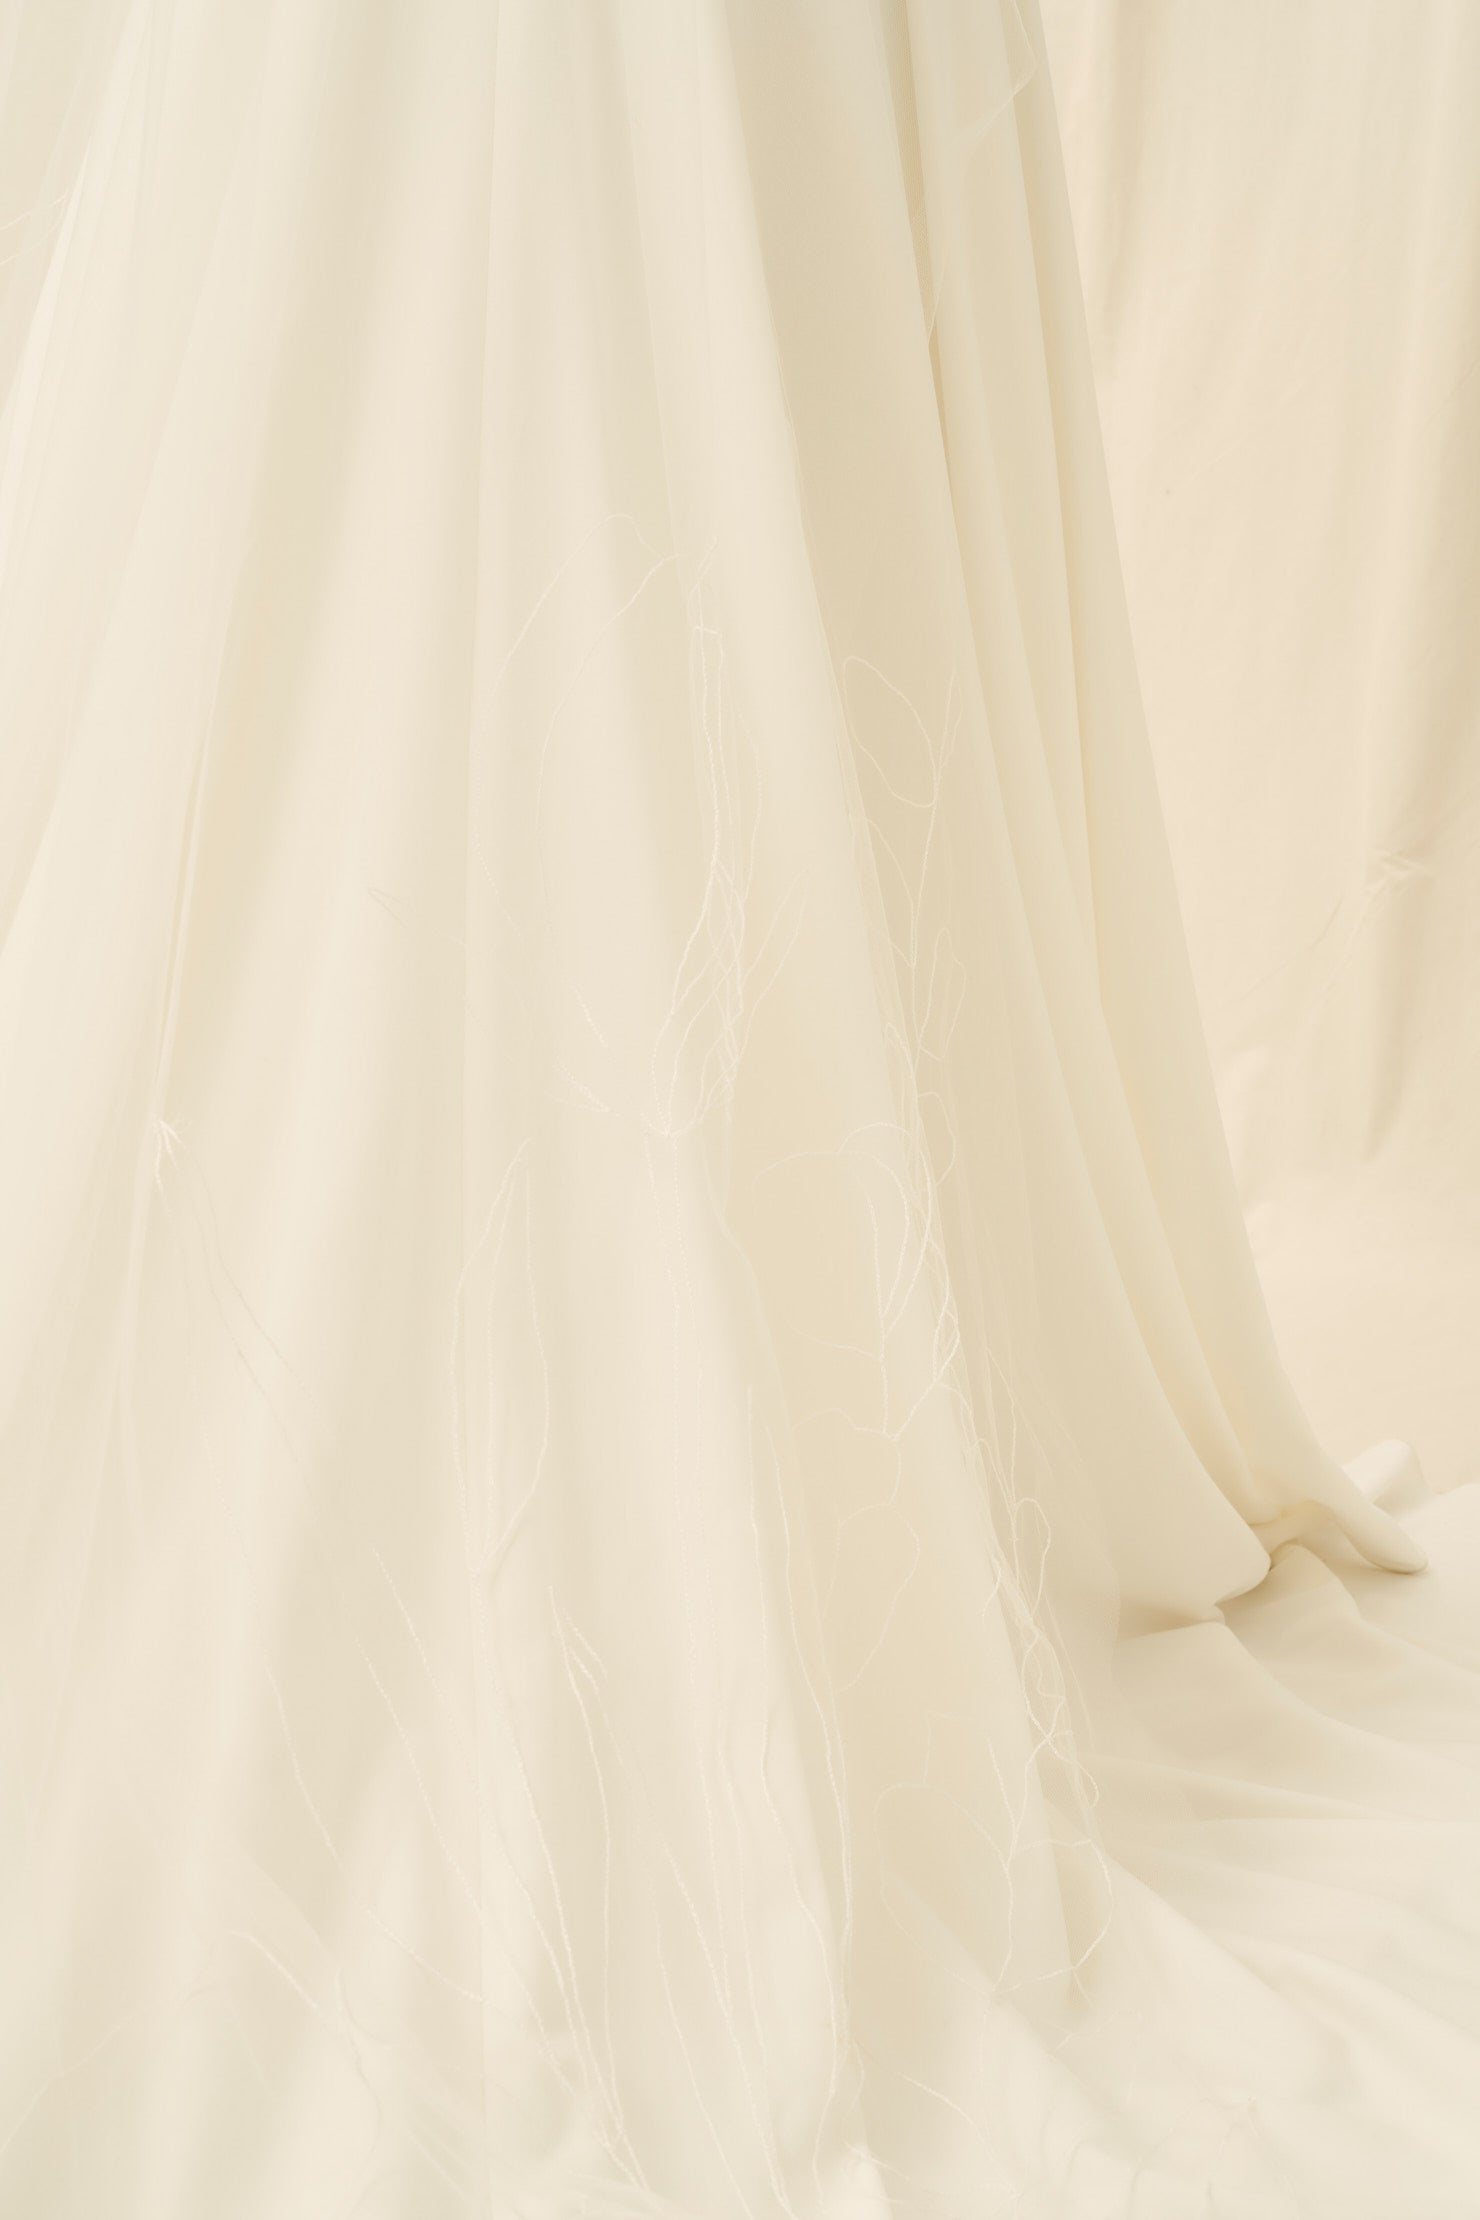 Bridal veils in Vancouver and Calgary